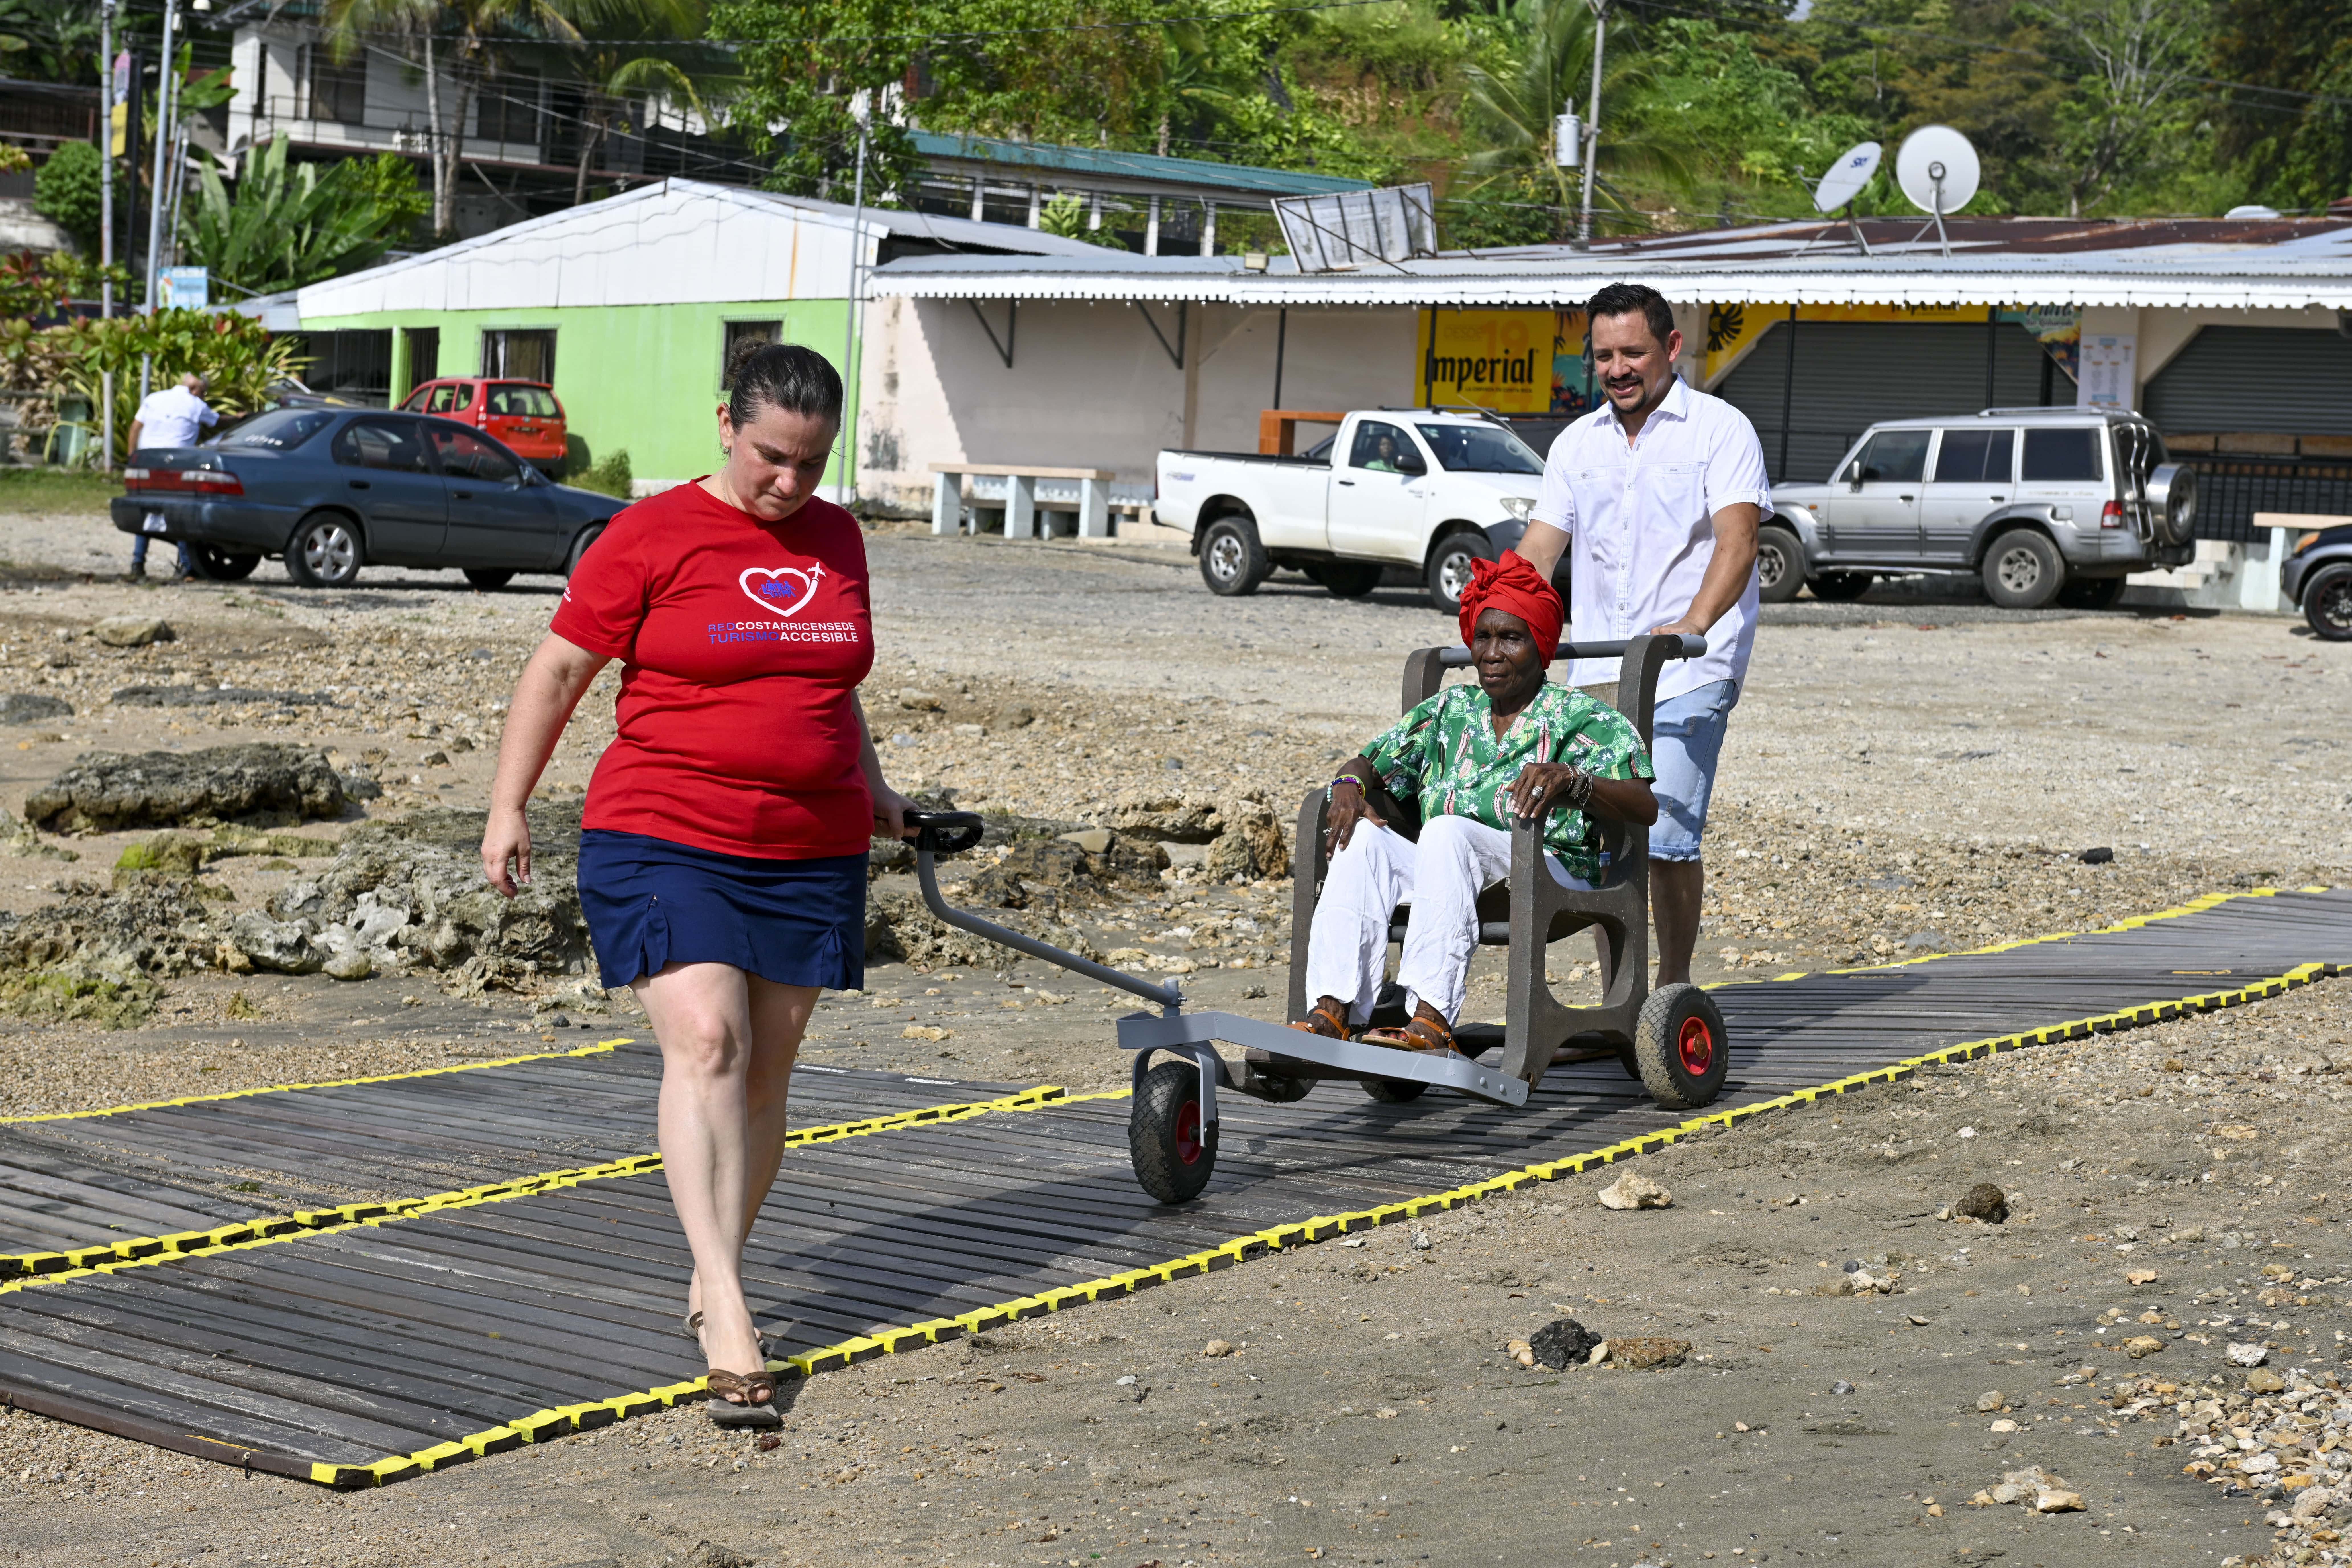 Piuta Beach in Limón (Costa Rica) has become the third accessible beach in the Caribbean thanks to an initiative fostered by ISTO’s members